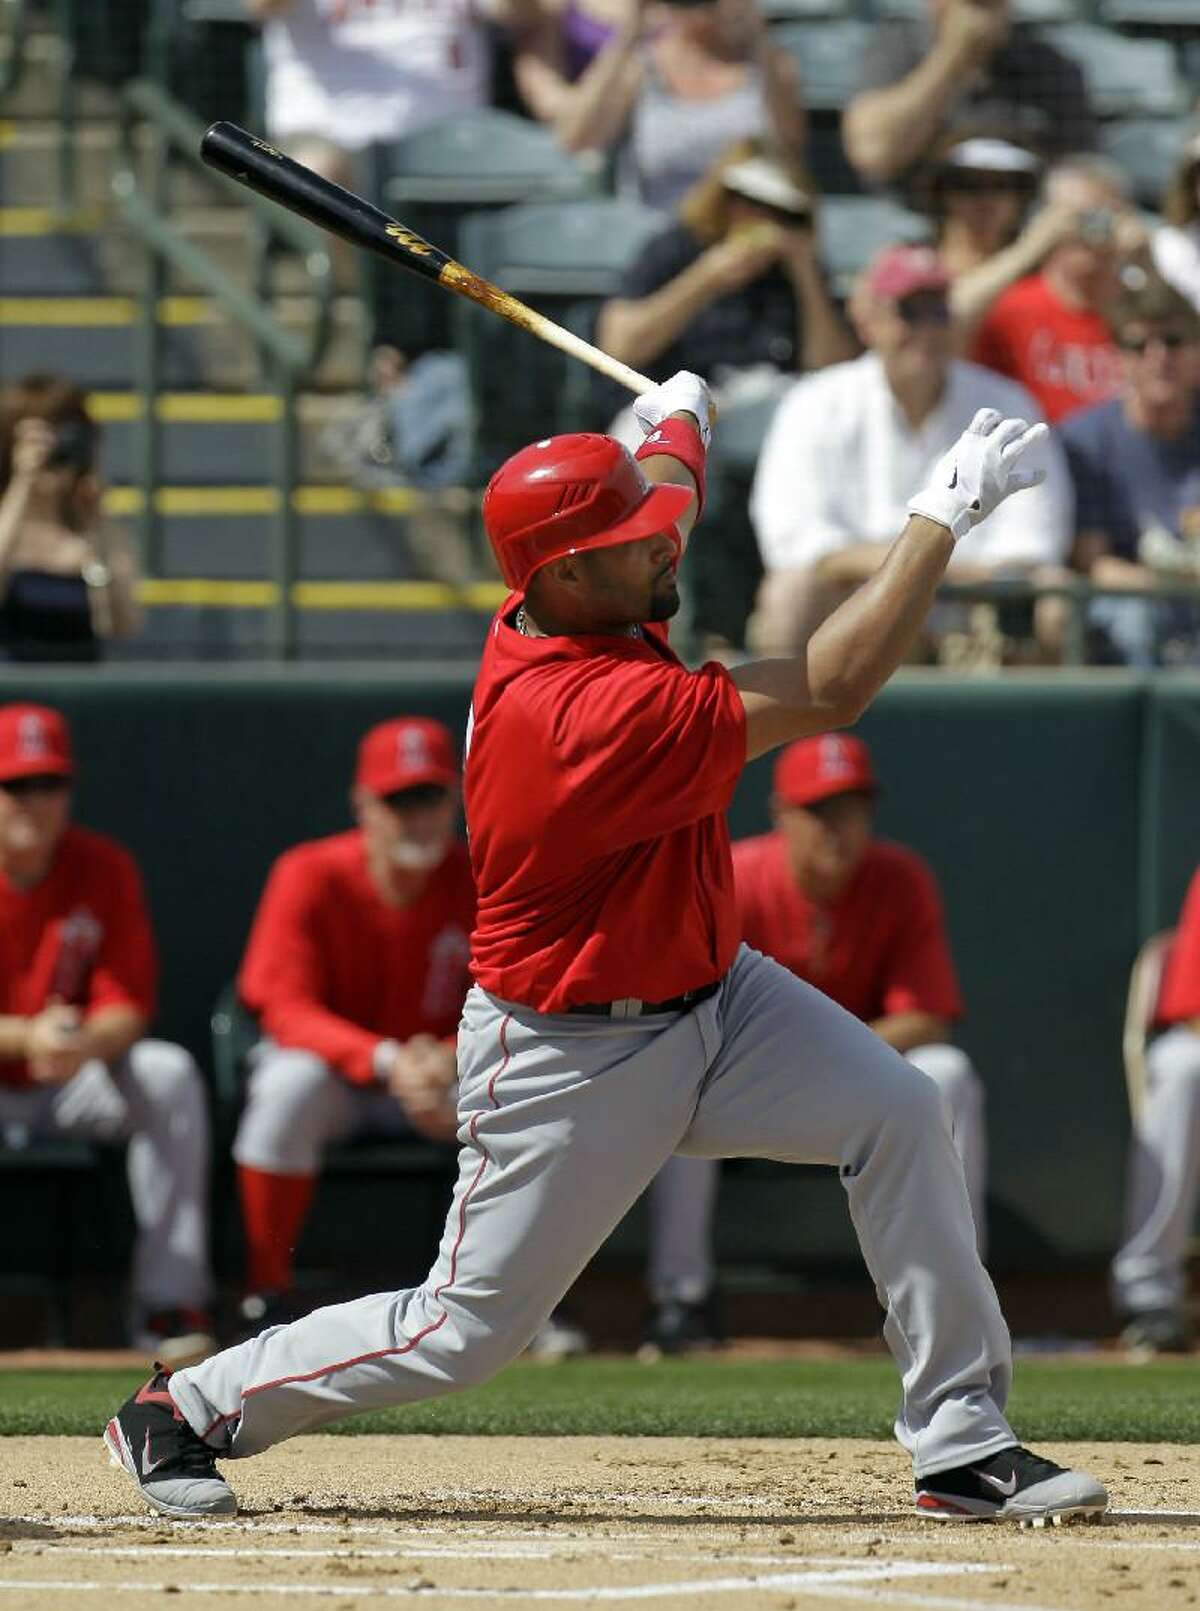 ASSOCIATED PRESS In this March 5 file photo, Los Angeles Angels first baseman Albert Pujols is shown at bat during a spring training game against the Oakland Athletics in Phoenix. Expect an extra wild year in baseball.